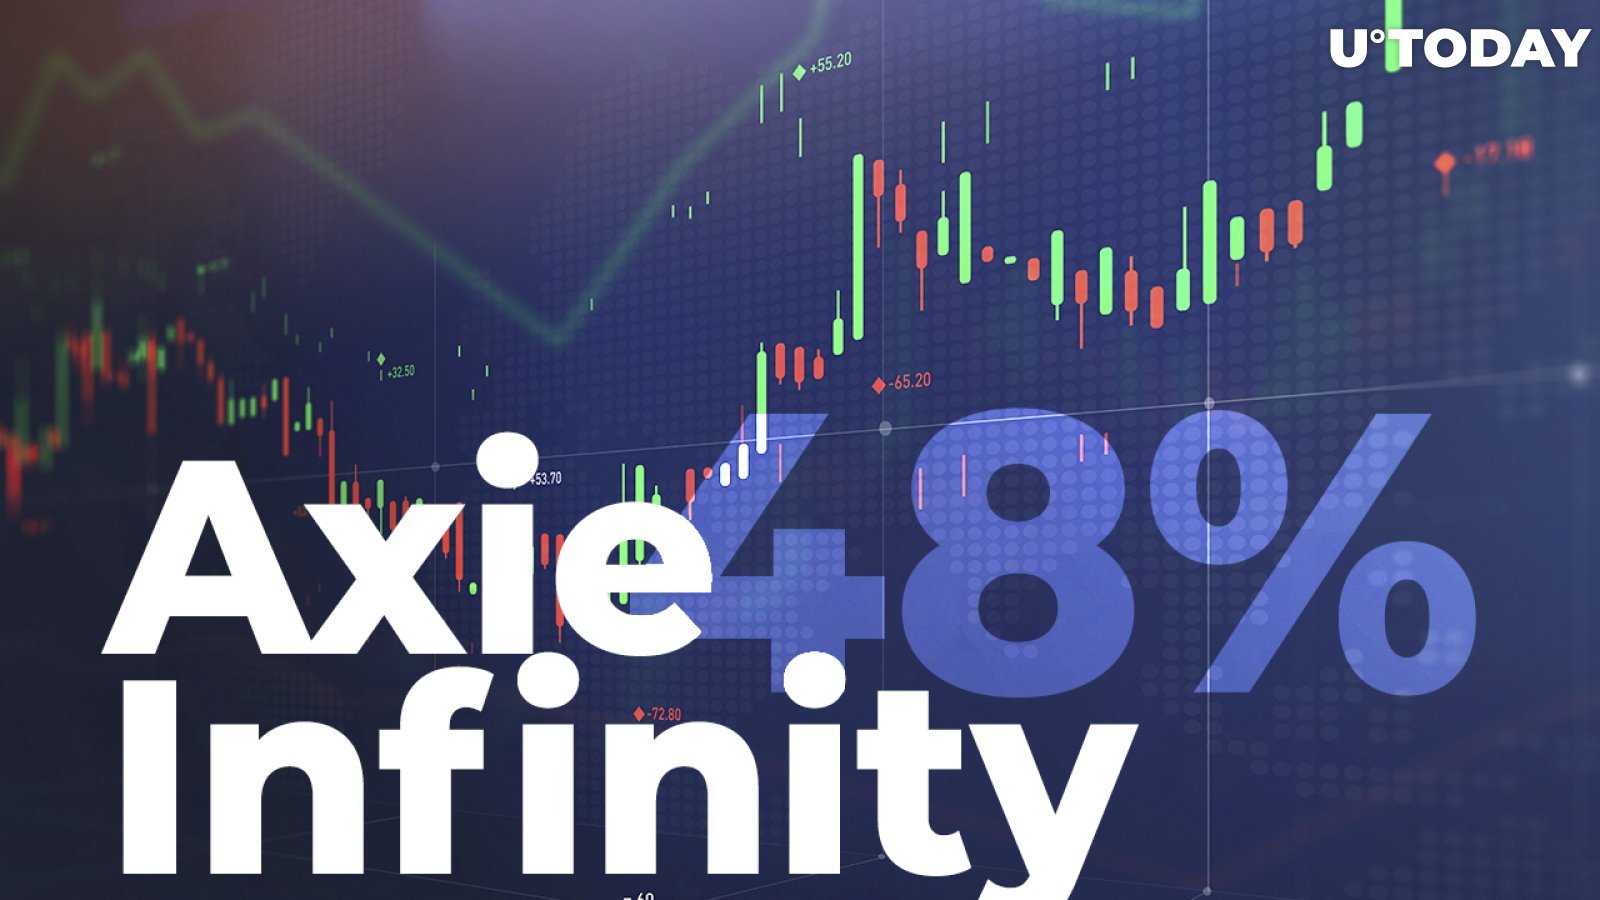 Axie Infinity Token Price Spikes by 48% in Last Two Days, Here Are Potential Reasons